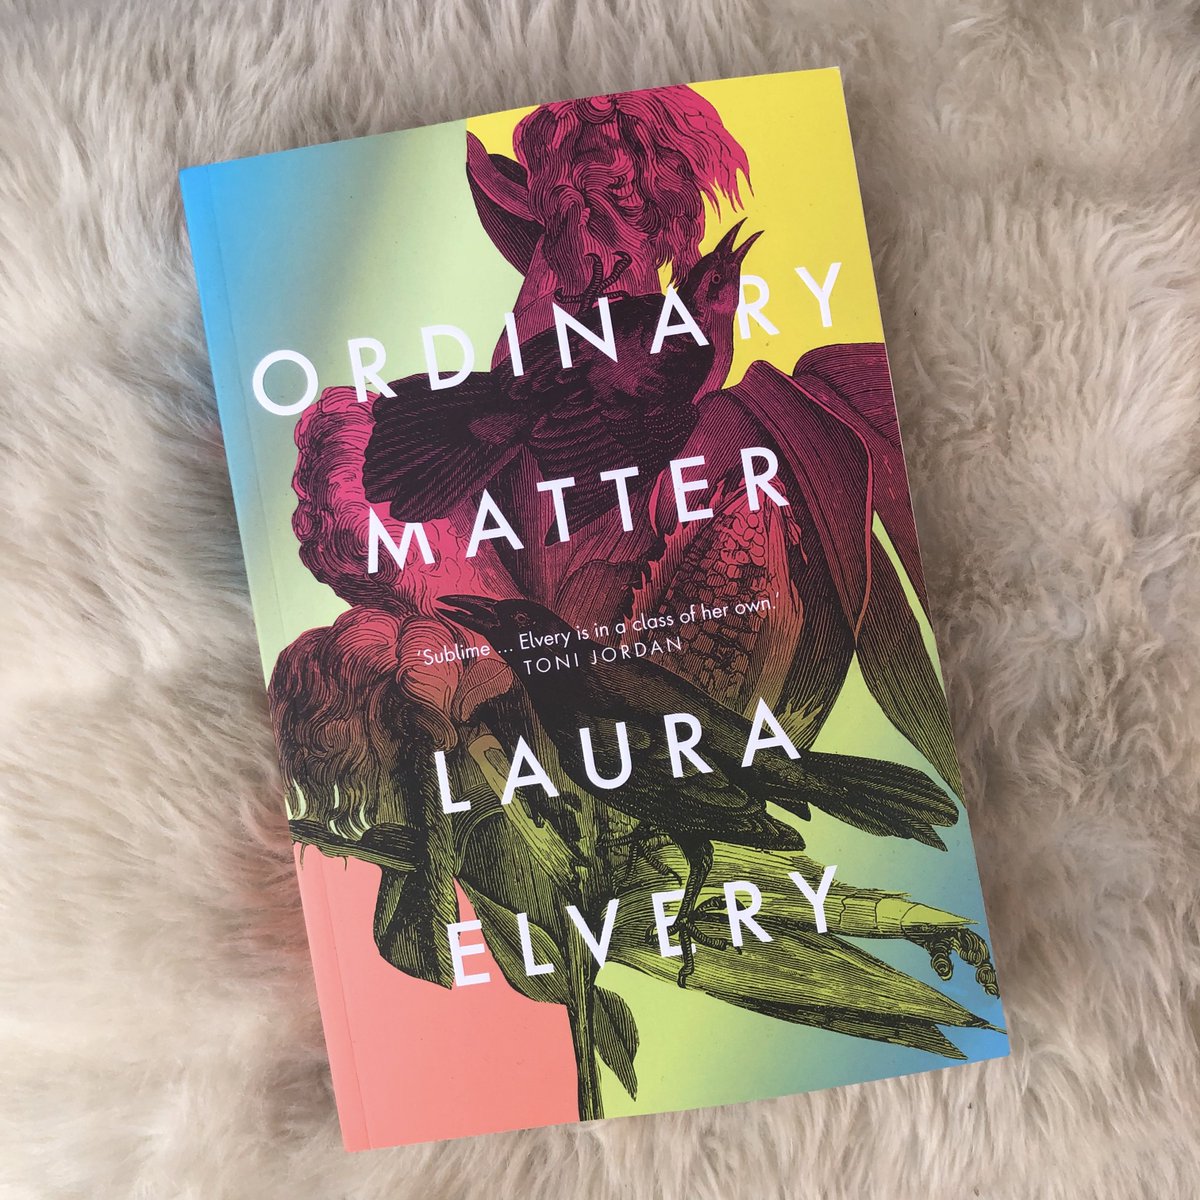 Ordinary Matter, by Laura Elvery  @UQPbooks I've only just started this collection of short stories by  @lauraelvery but am thoroughly enjoying it so far. Inspired by the twenty times women have won Nobel Prizes for science.